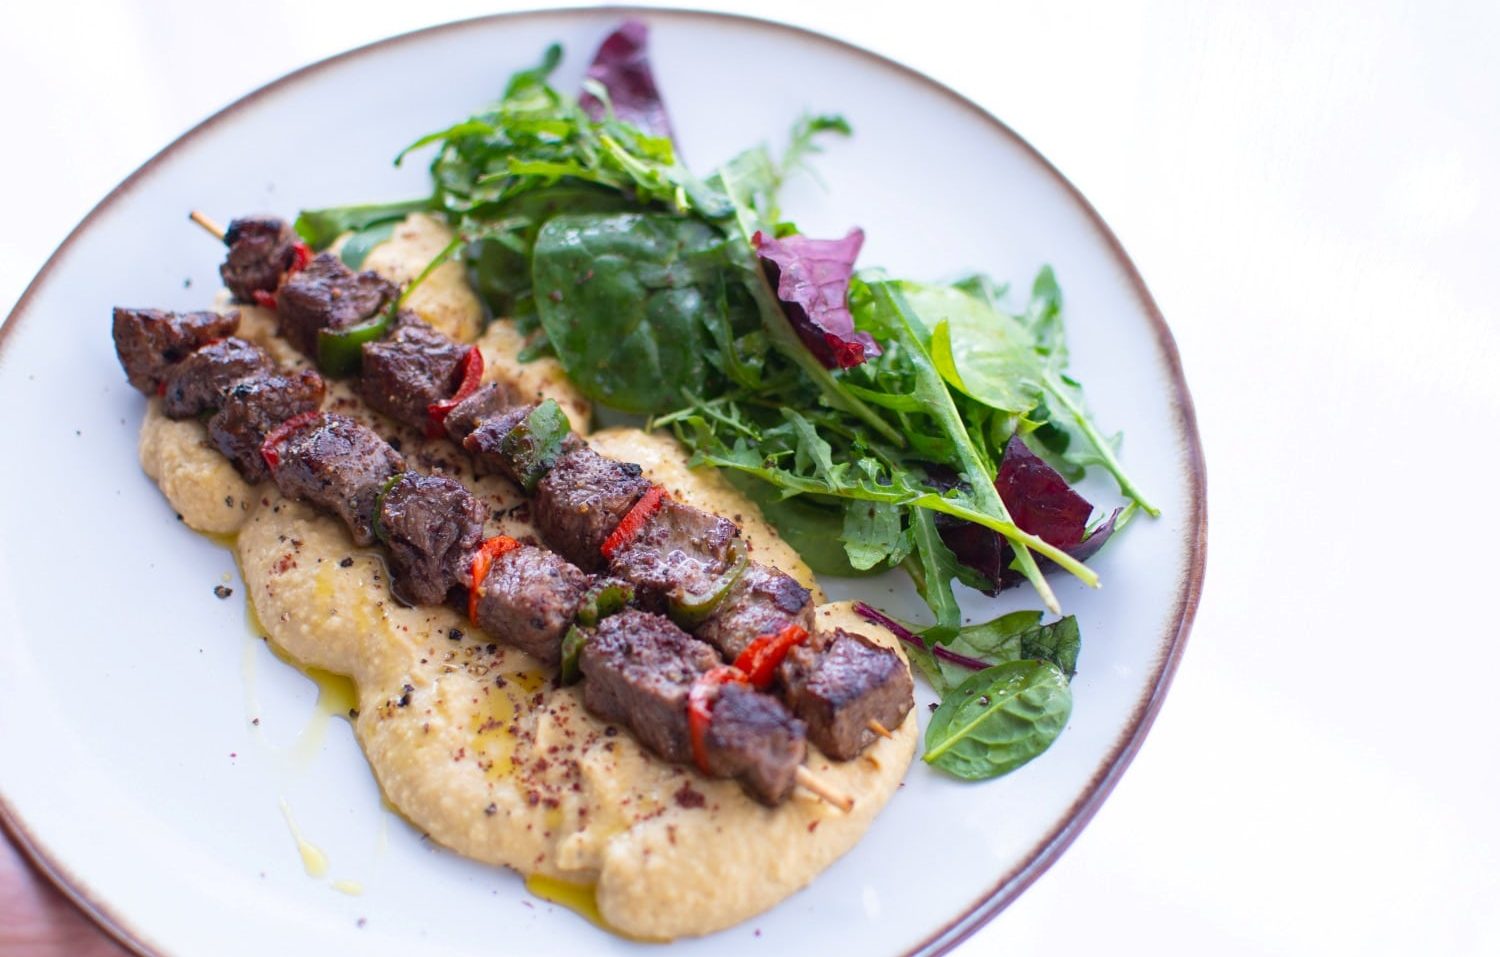 Spicy Beef Skewers with Hummus - Chef’s Pencil